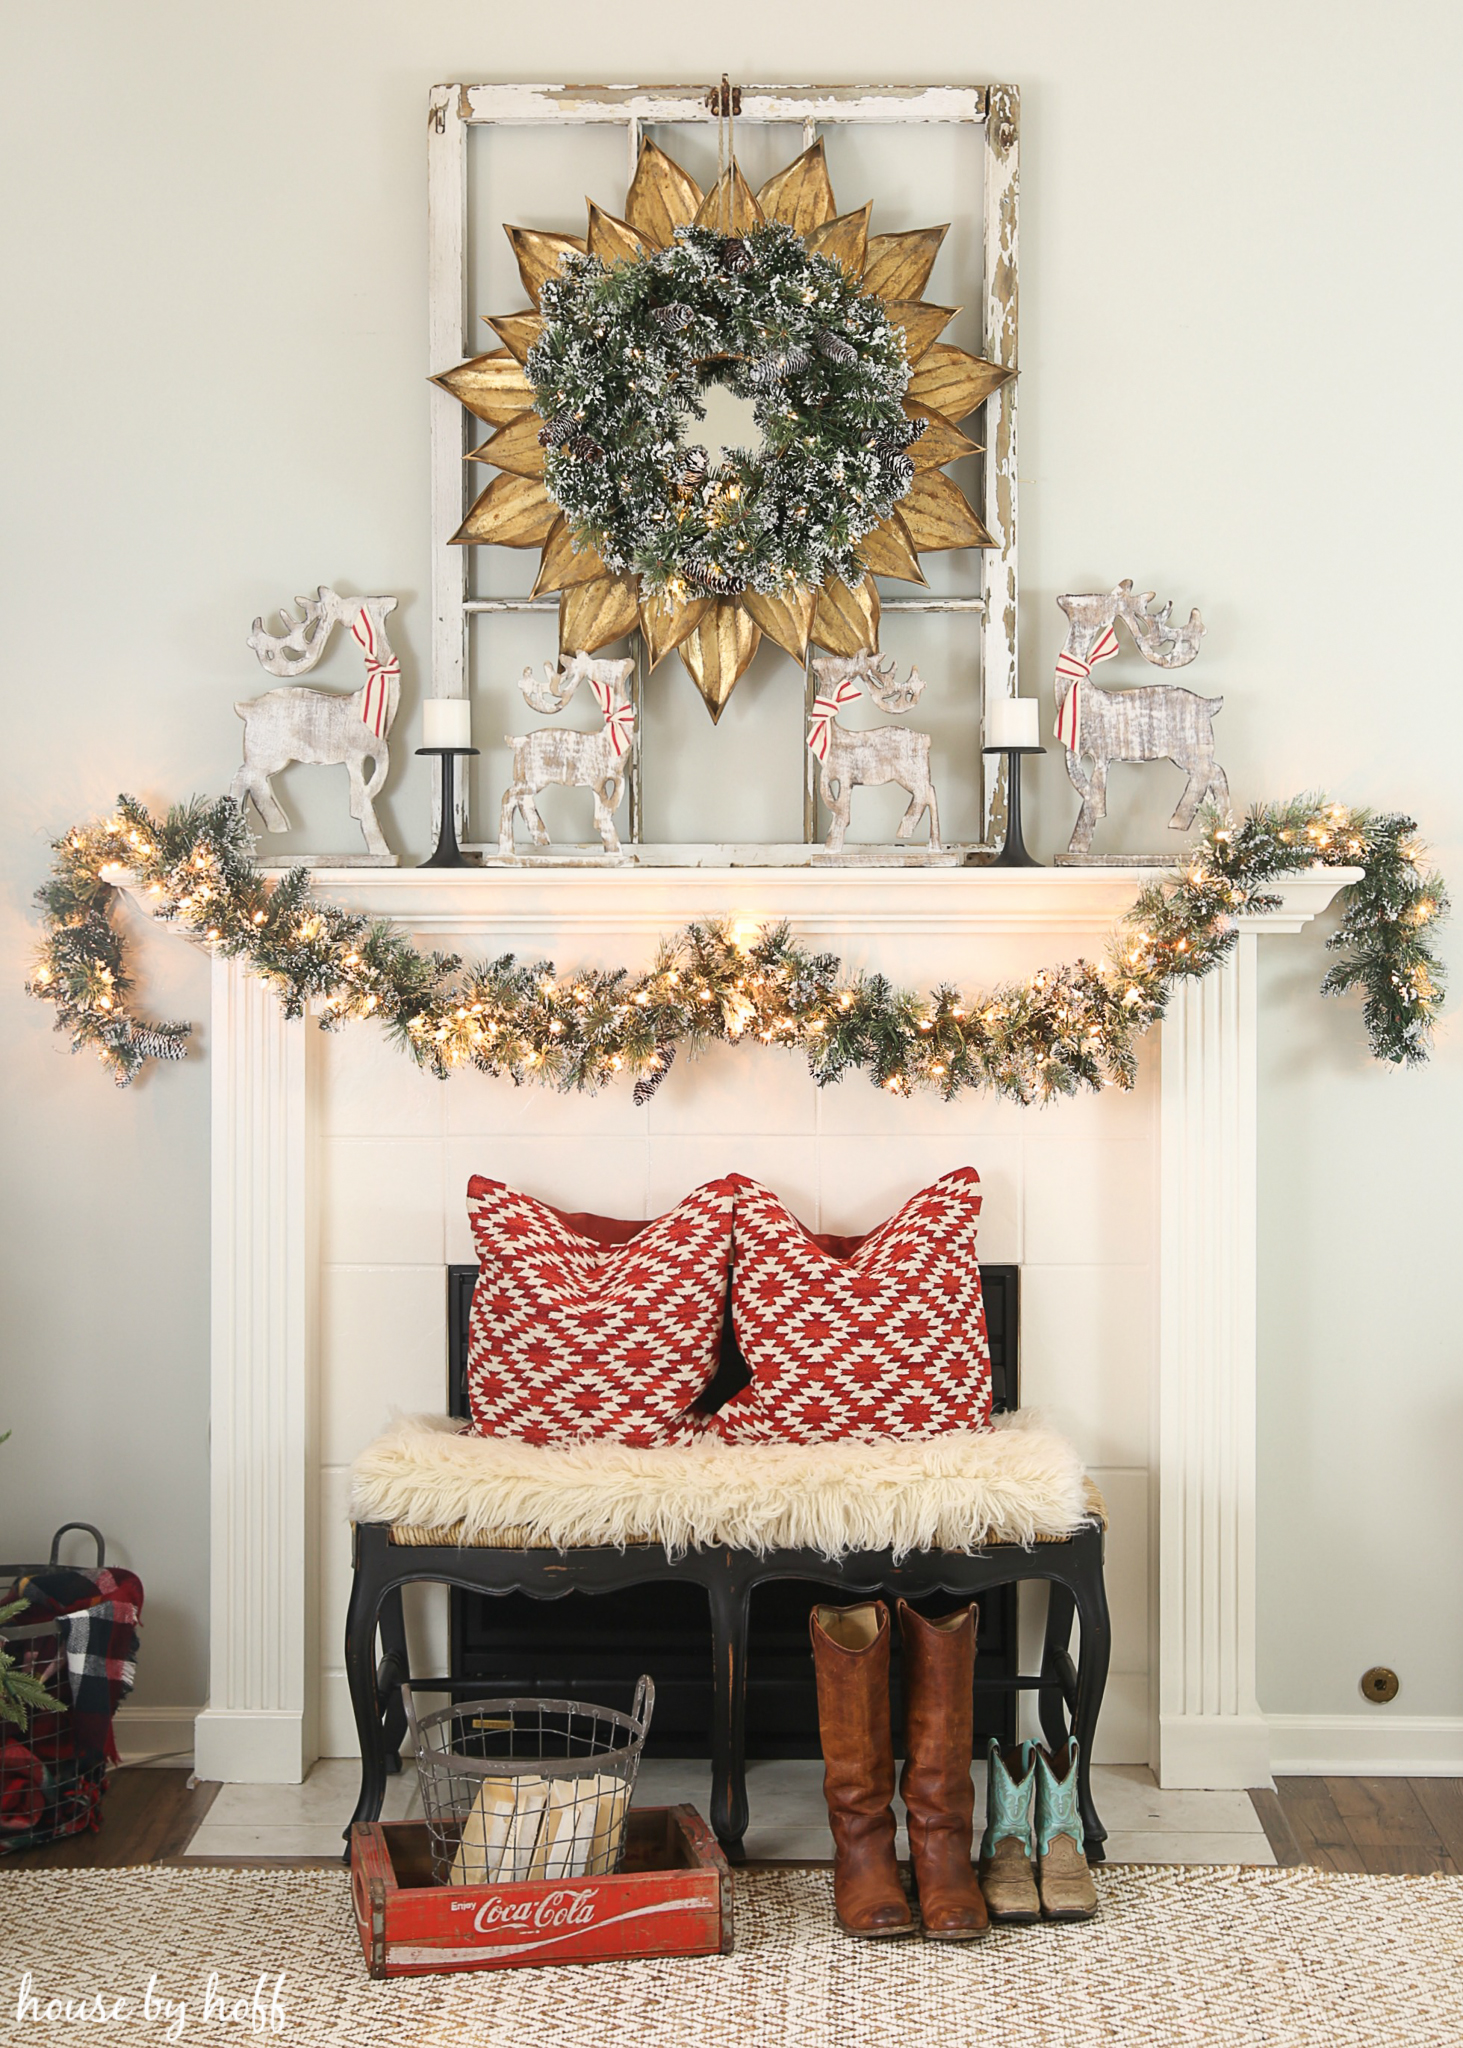 Holiday Home Tour Part I: Our Christmas Mantel - House by Hoff